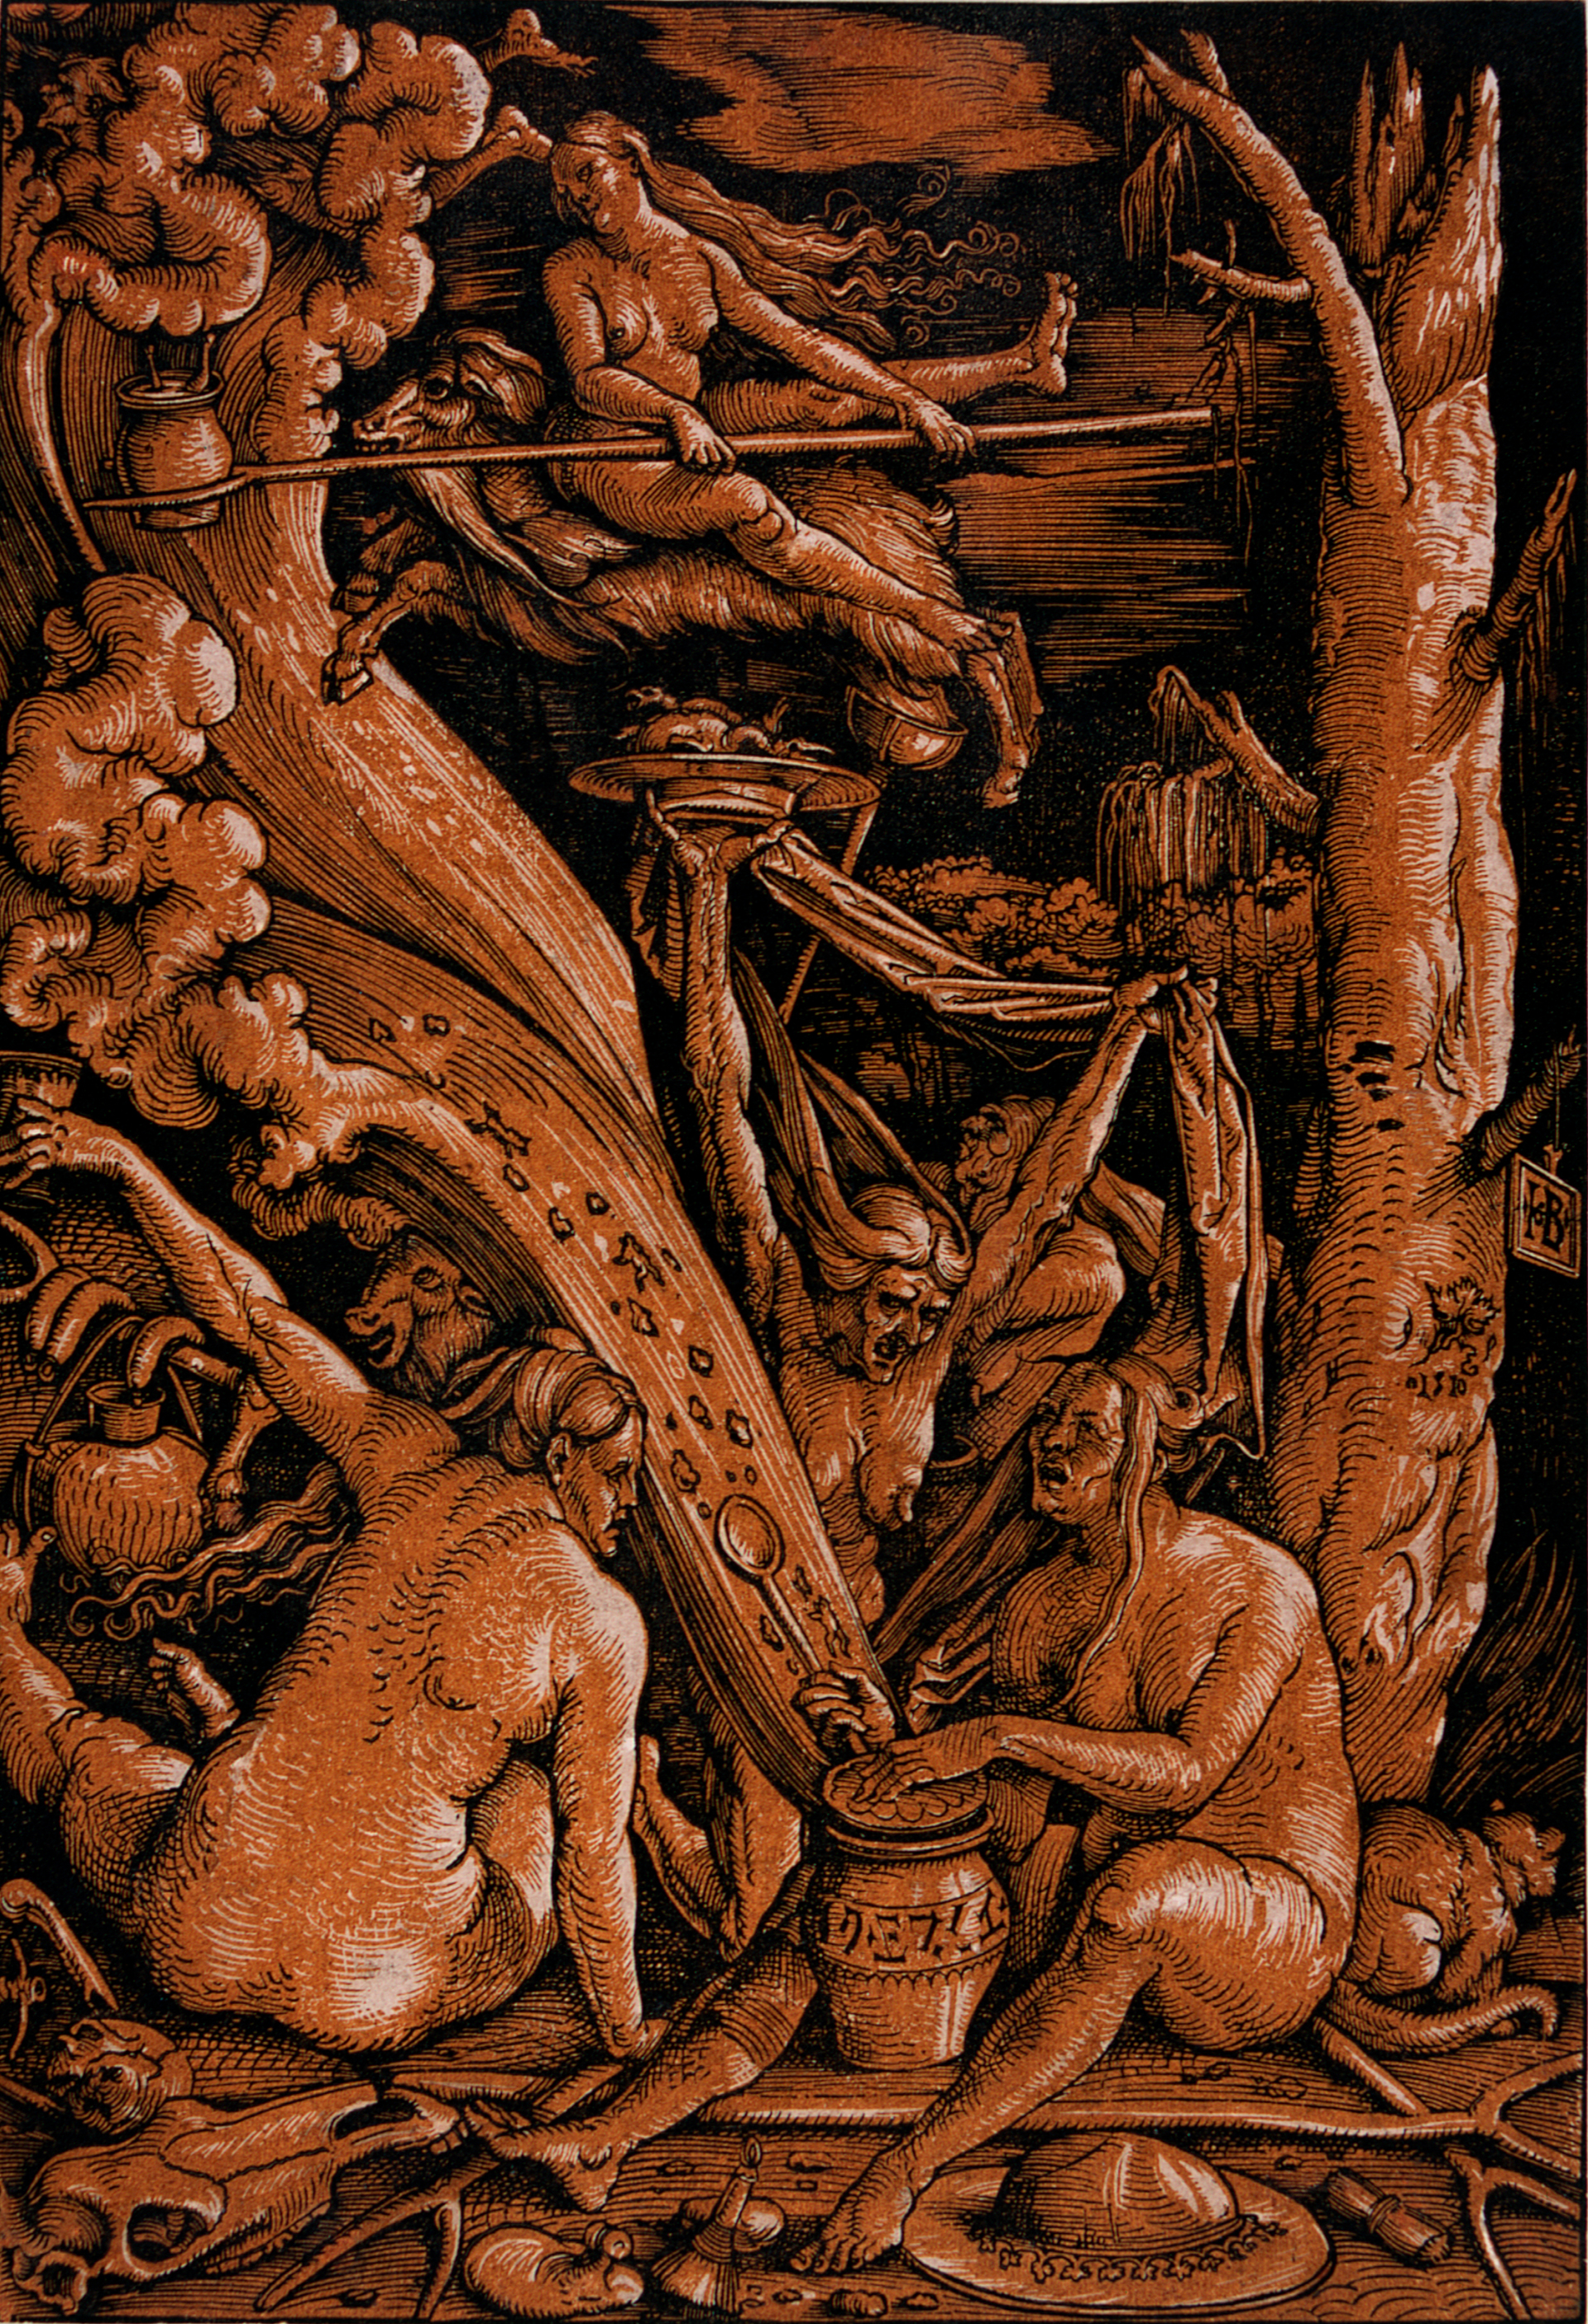 Image of the clair obscure wood Witches by Hans Baldung Grien from 1510. lent by Stiftung Schloss Friedenstein Gotha. The artwork shows different people looking very angry and all are naked. The artwork was part of an exhibition at the Kunsthalle Karlsruhe.